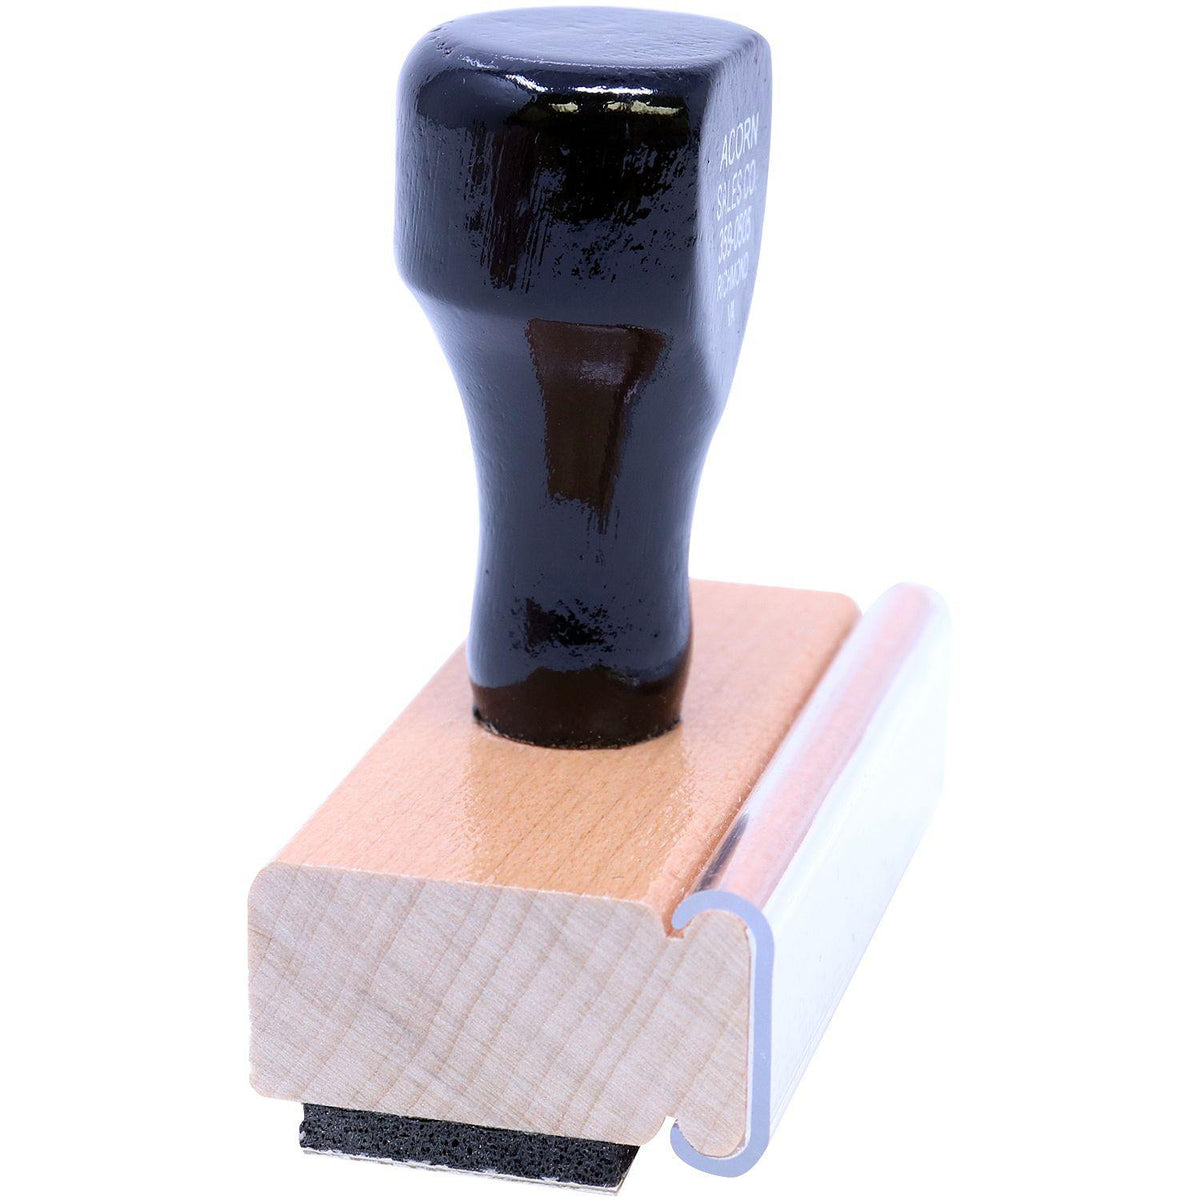 Side View of Large Bold Copy Rubber Stamp at an Angle